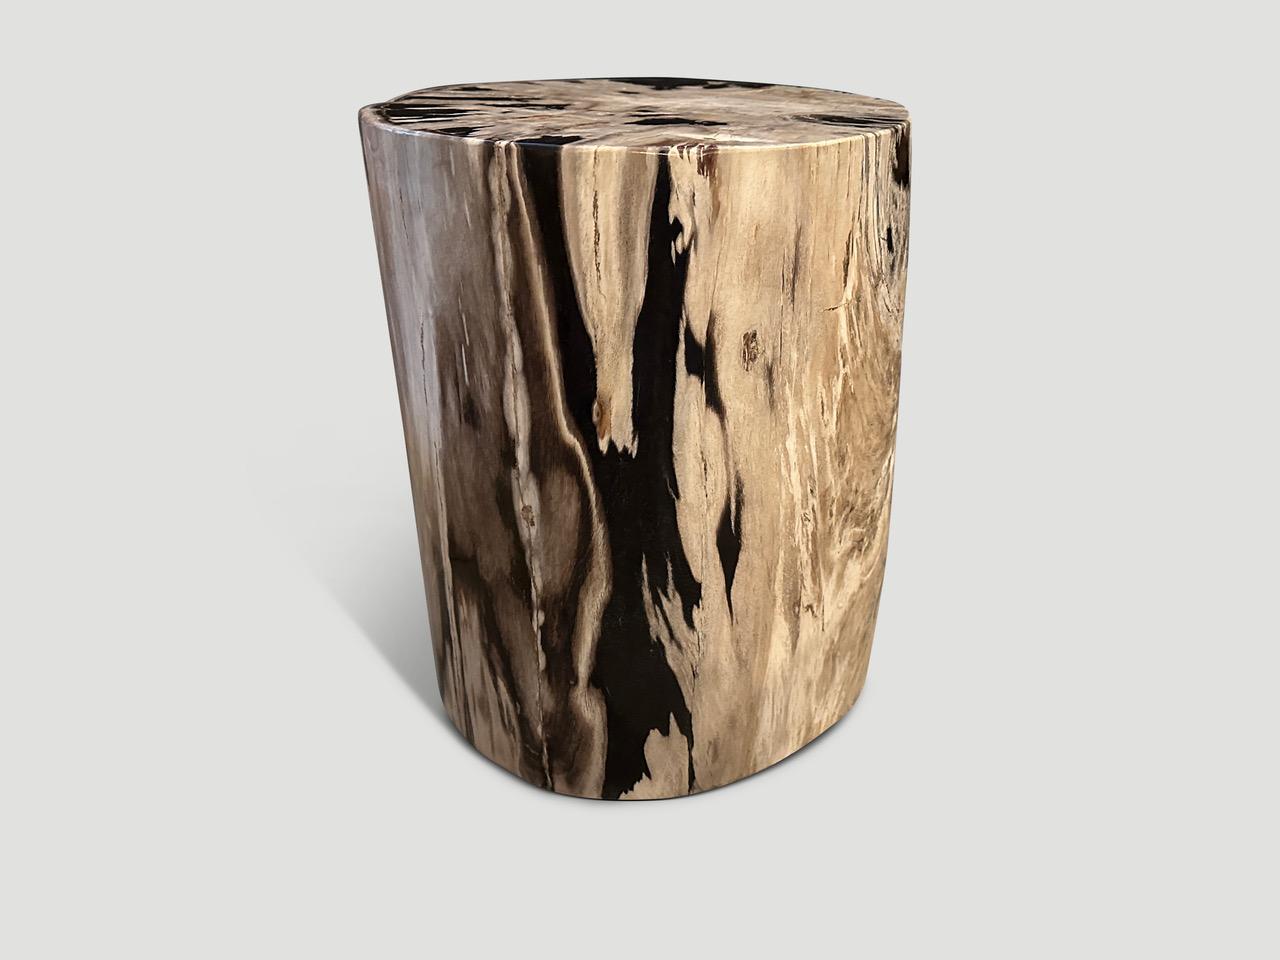 Impressive beautiful dramatic tones on this high quality super smooth, tall petrified wood side table. It’s fascinating how Mother Nature produces these stunning 40 million year old petrified teak logs with such contrasting colors and natural